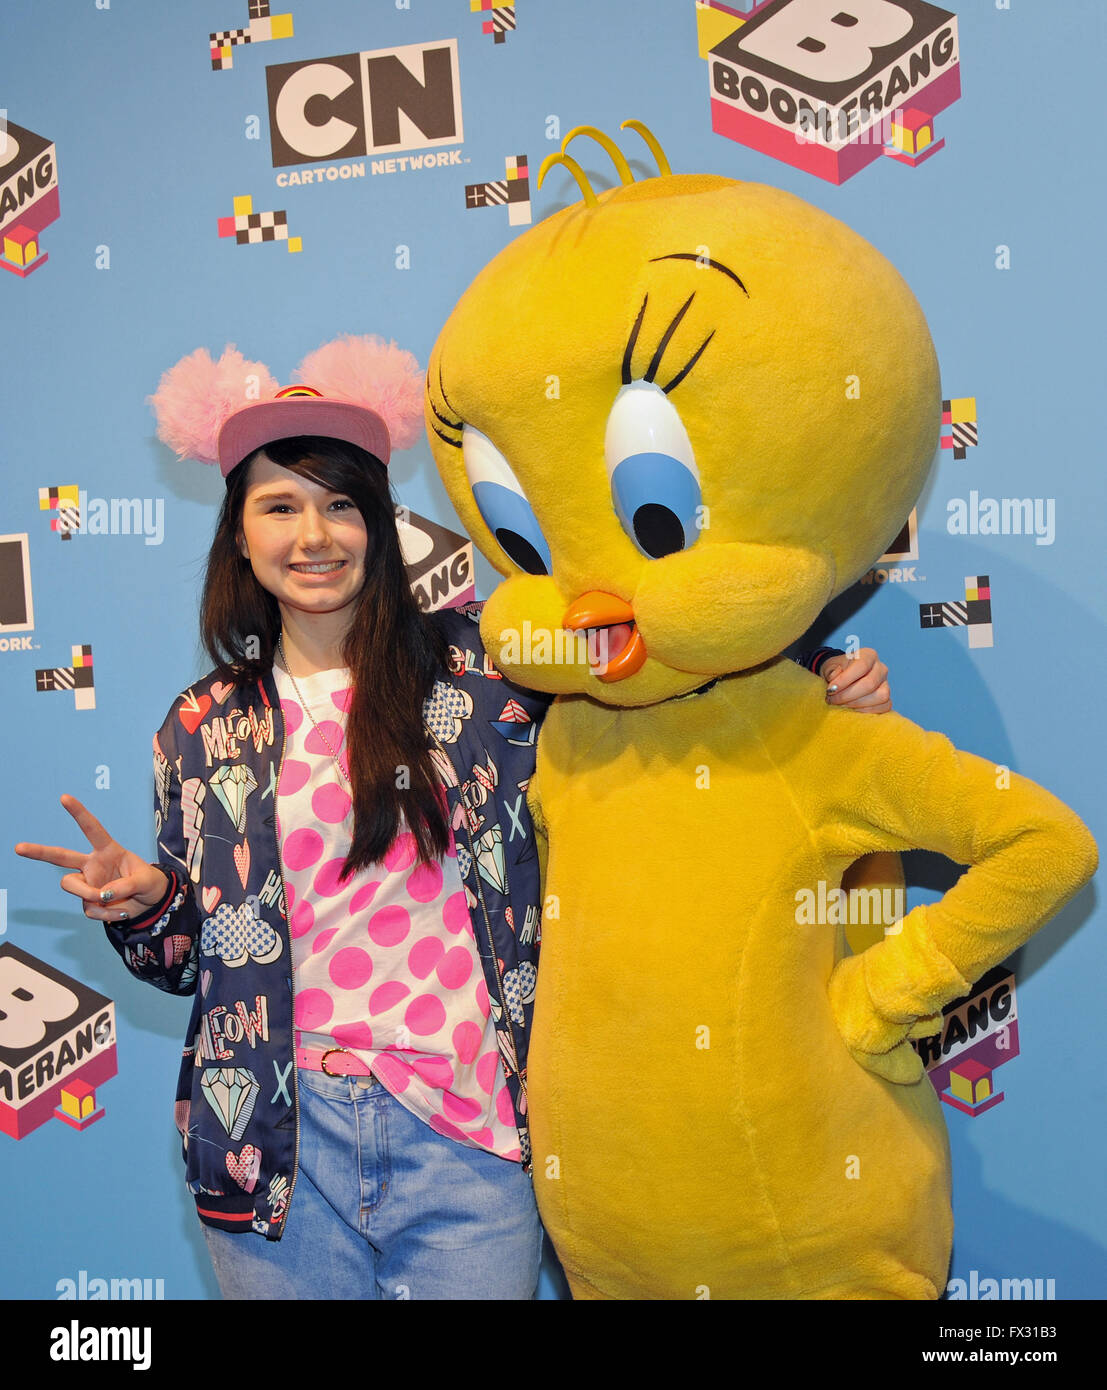 Munich, Germany. 10th Apr, 2016. German singer Jamie-Lee Kriewitz (L) poses next to cartoon character Tweety upon her arrival at Fun Day, the celebrations marking the 10th anniversary of the children's and cartoon television channel Cartoon Network and Boomerang, at TonHalle in Munich, Germany, 10 April 2016. Kriewitz is to represent Germany in the upcoming Eurovision Song Contest to be held in Stockholm, Sweden. Photo: URSULA DUEREN/dpa/Alamy Live News Stock Photo